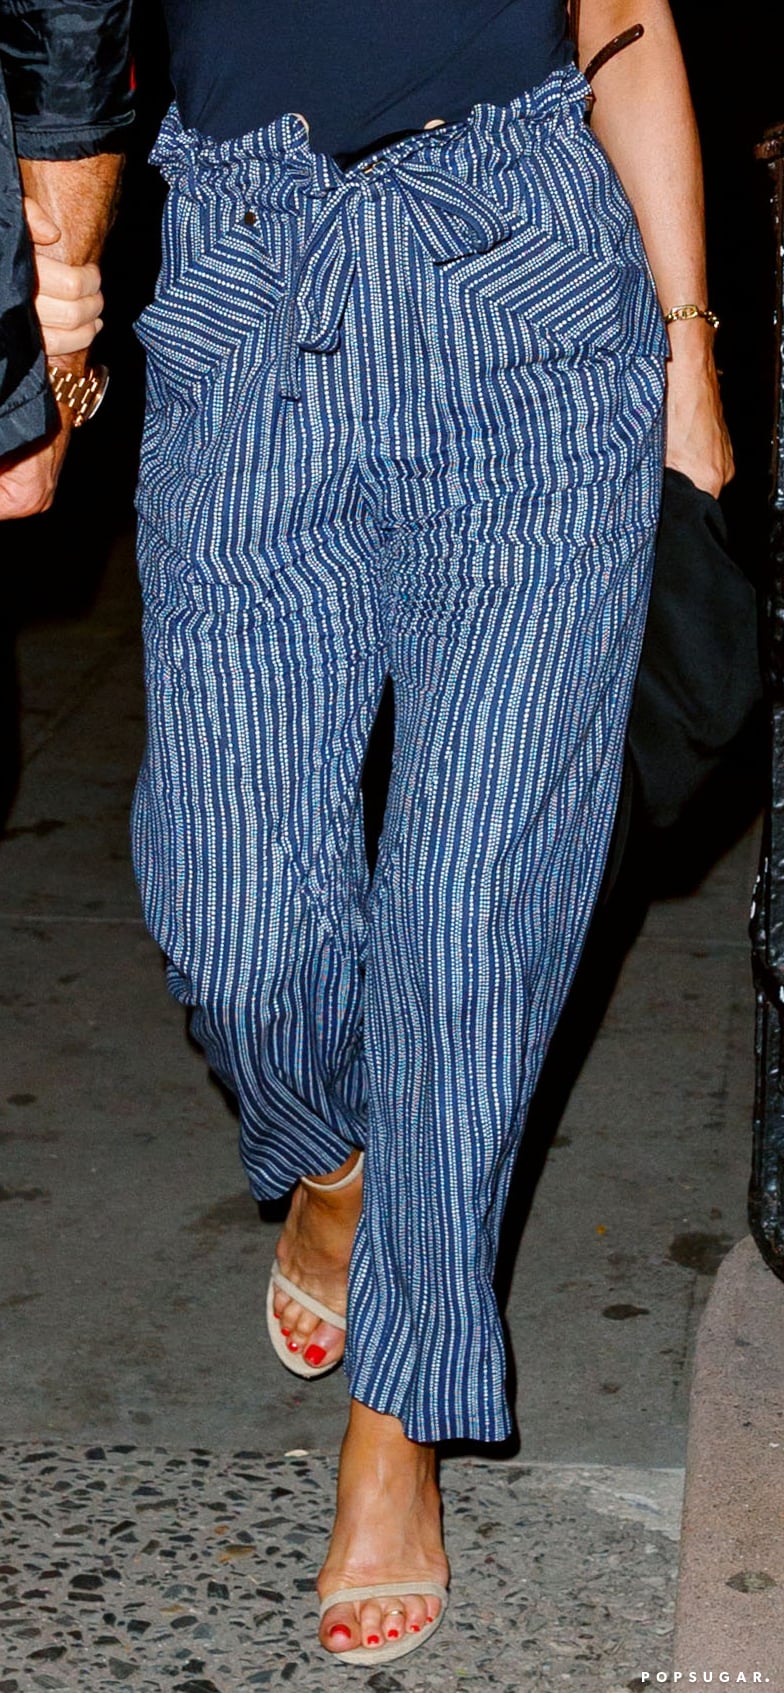 She Styled the Belted Pants With a Pair of Ankle-Strap Sandals